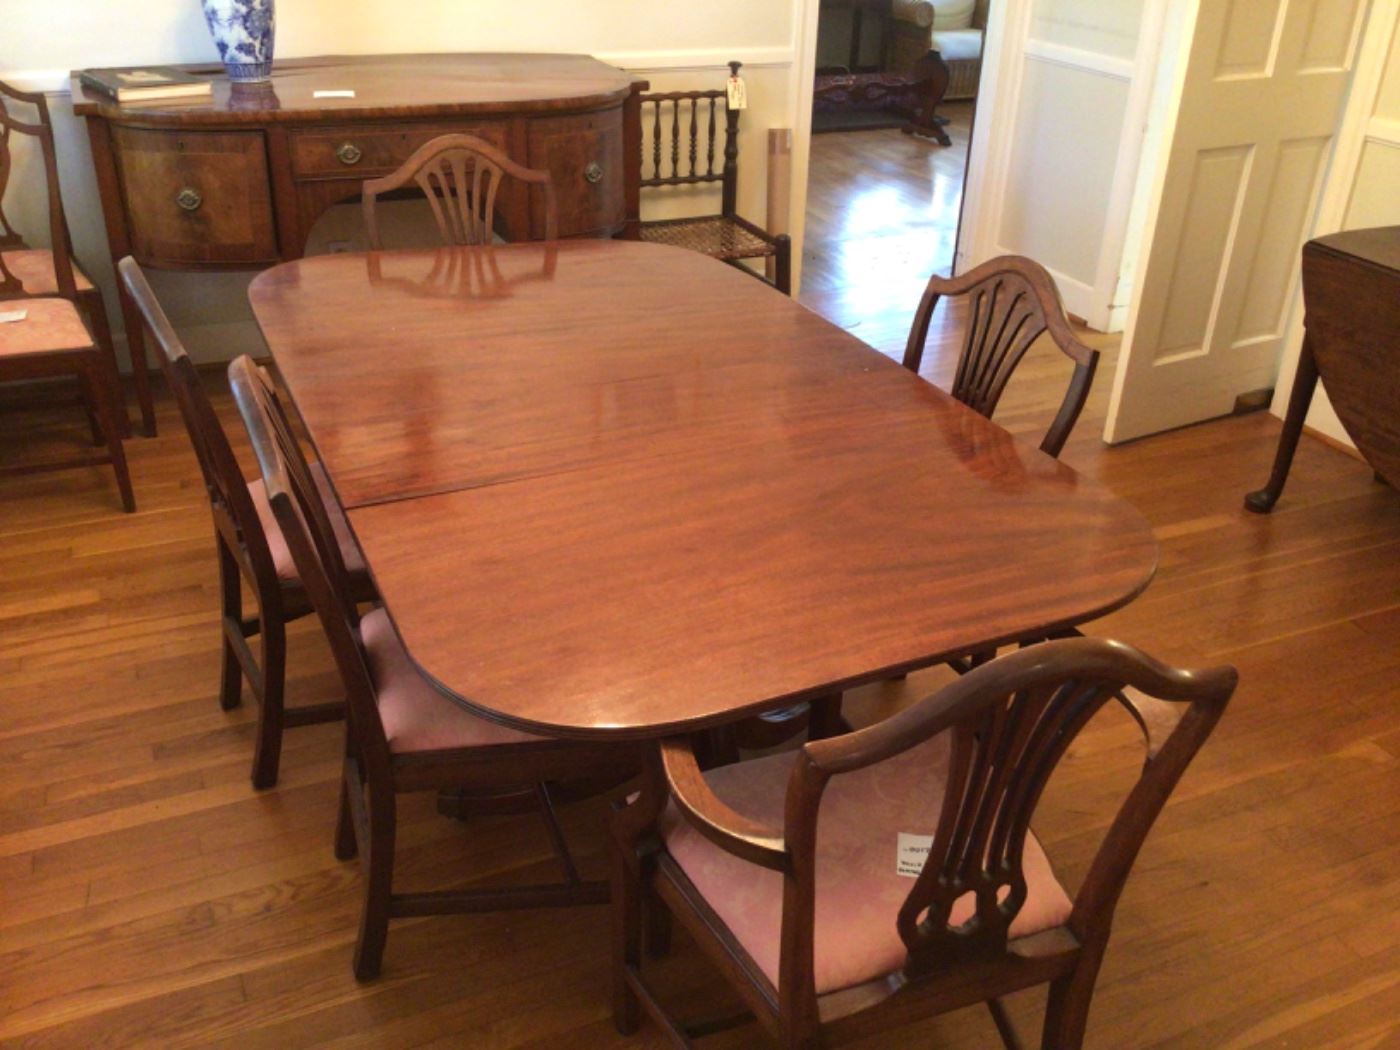 Duncan Phyfe Style Dining Table with Hepplewhite Shield Back Chairs Circa 1790